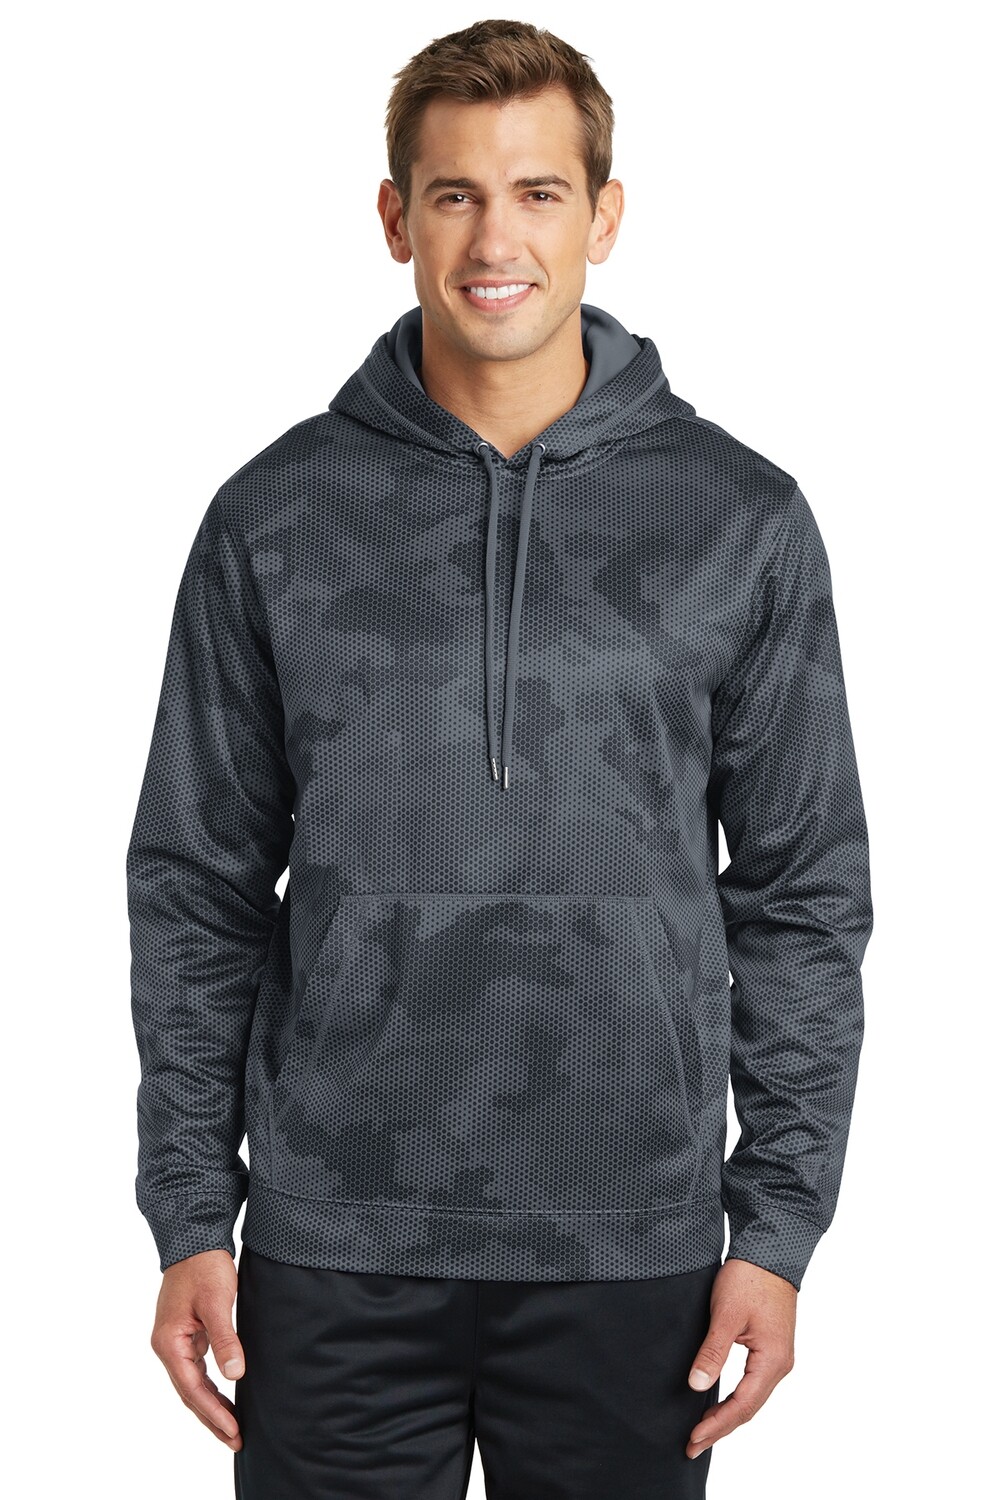 Sport-Tek® Sport-Wick® CamoHex Fleece Hooded Pullover Youth and Adult With BumbleBee design on Full Front